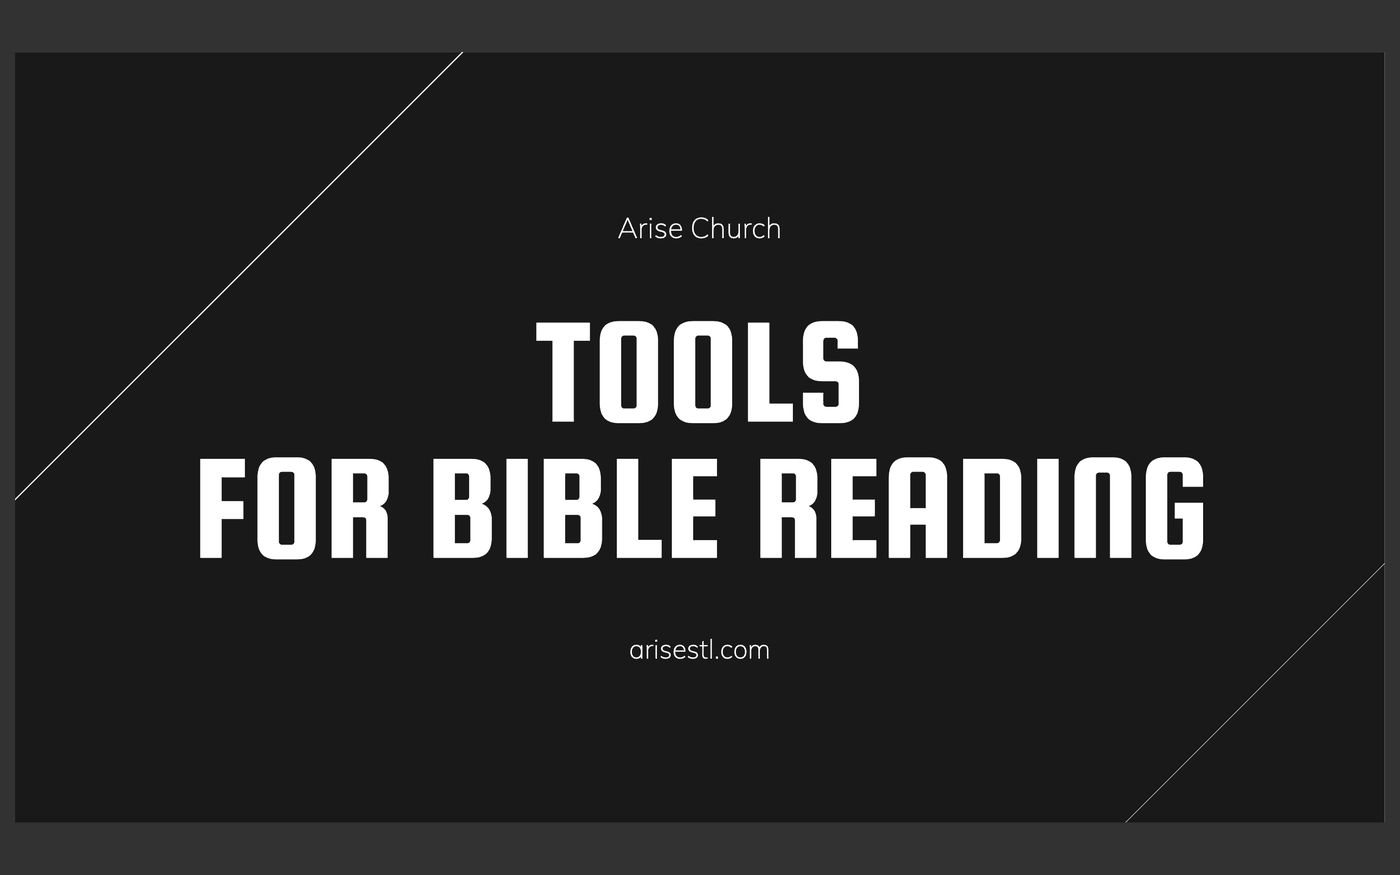 Tools for Bible Reading